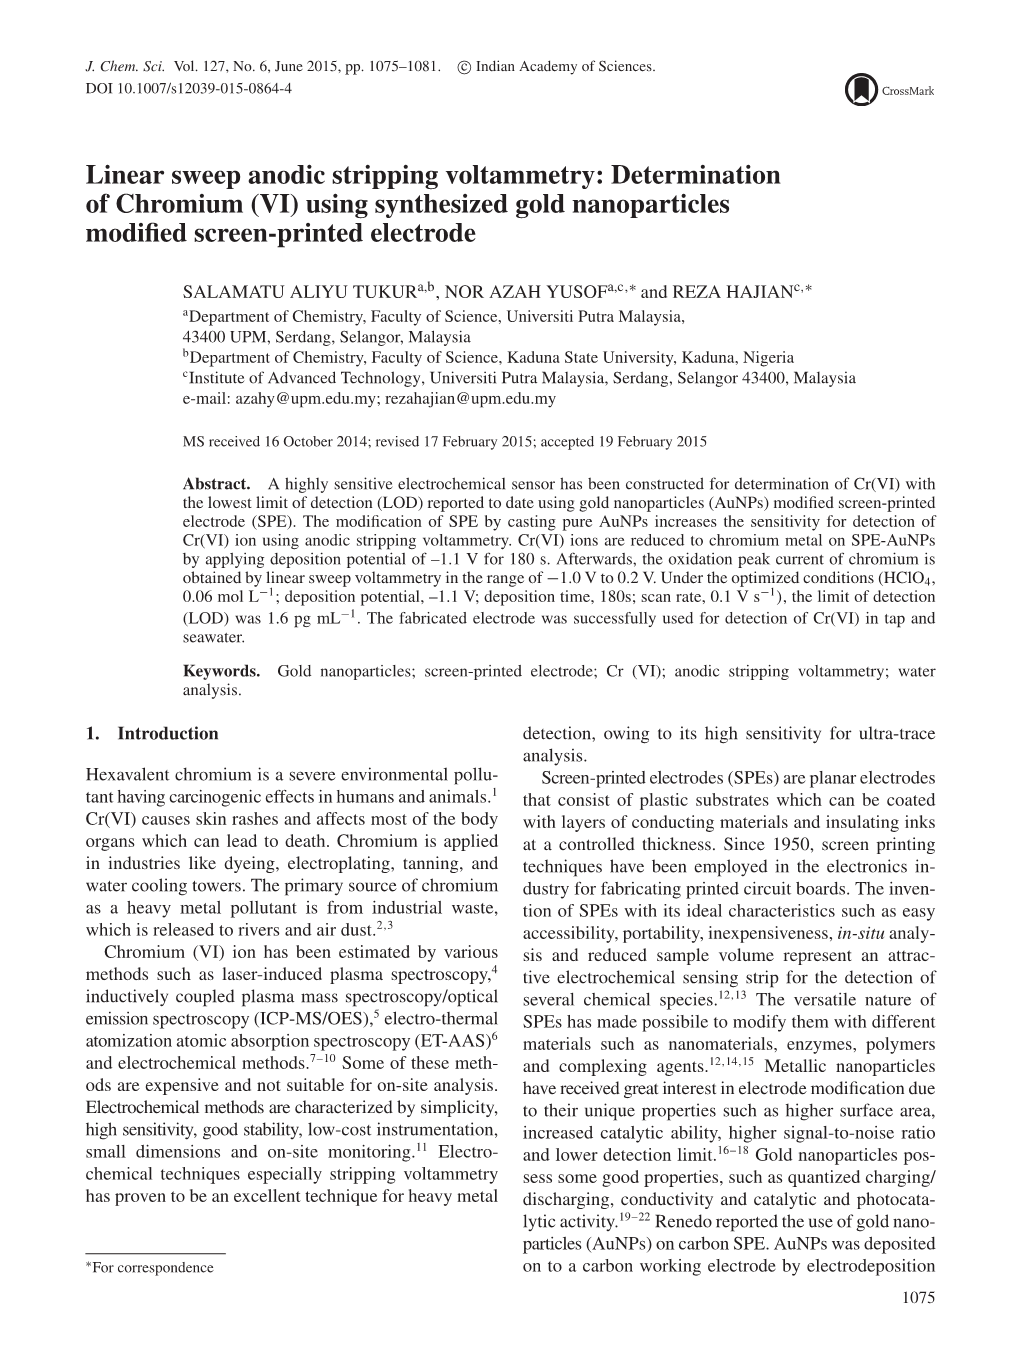 Linear Sweep Anodic Stripping Voltammetry: Determination of Chromium (VI) Using Synthesized Gold Nanoparticles Modiﬁed Screen-Printed Electrode